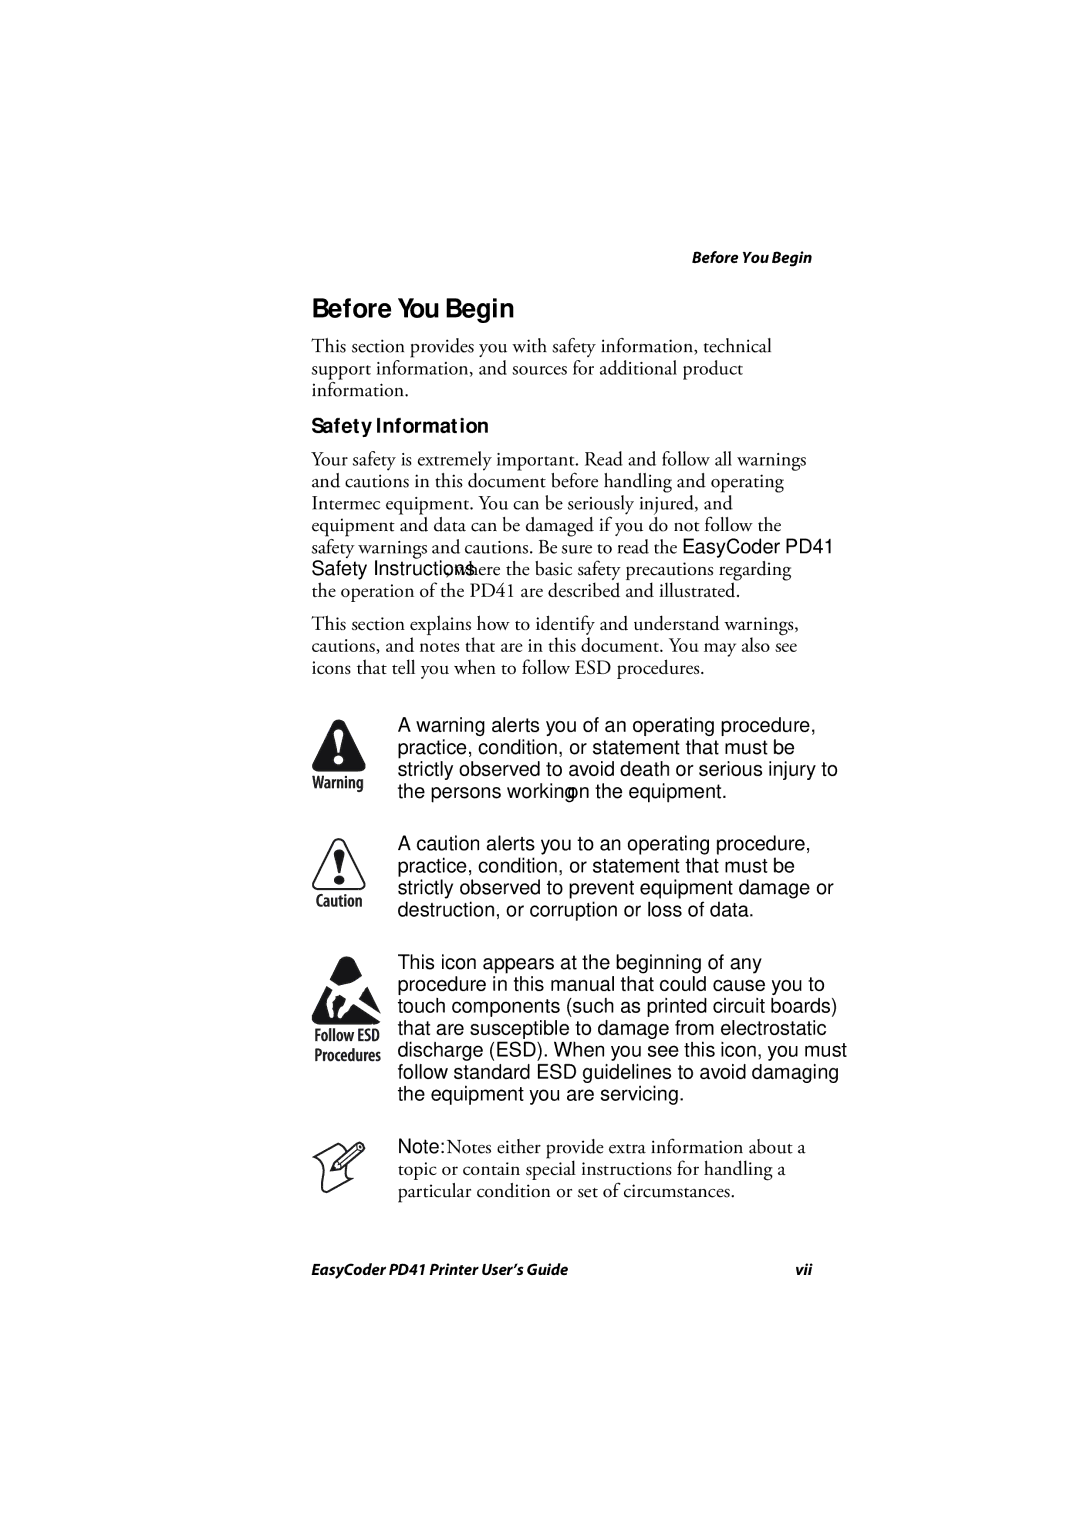 Intermec PD41 manual Before You Begin, Safety Information 